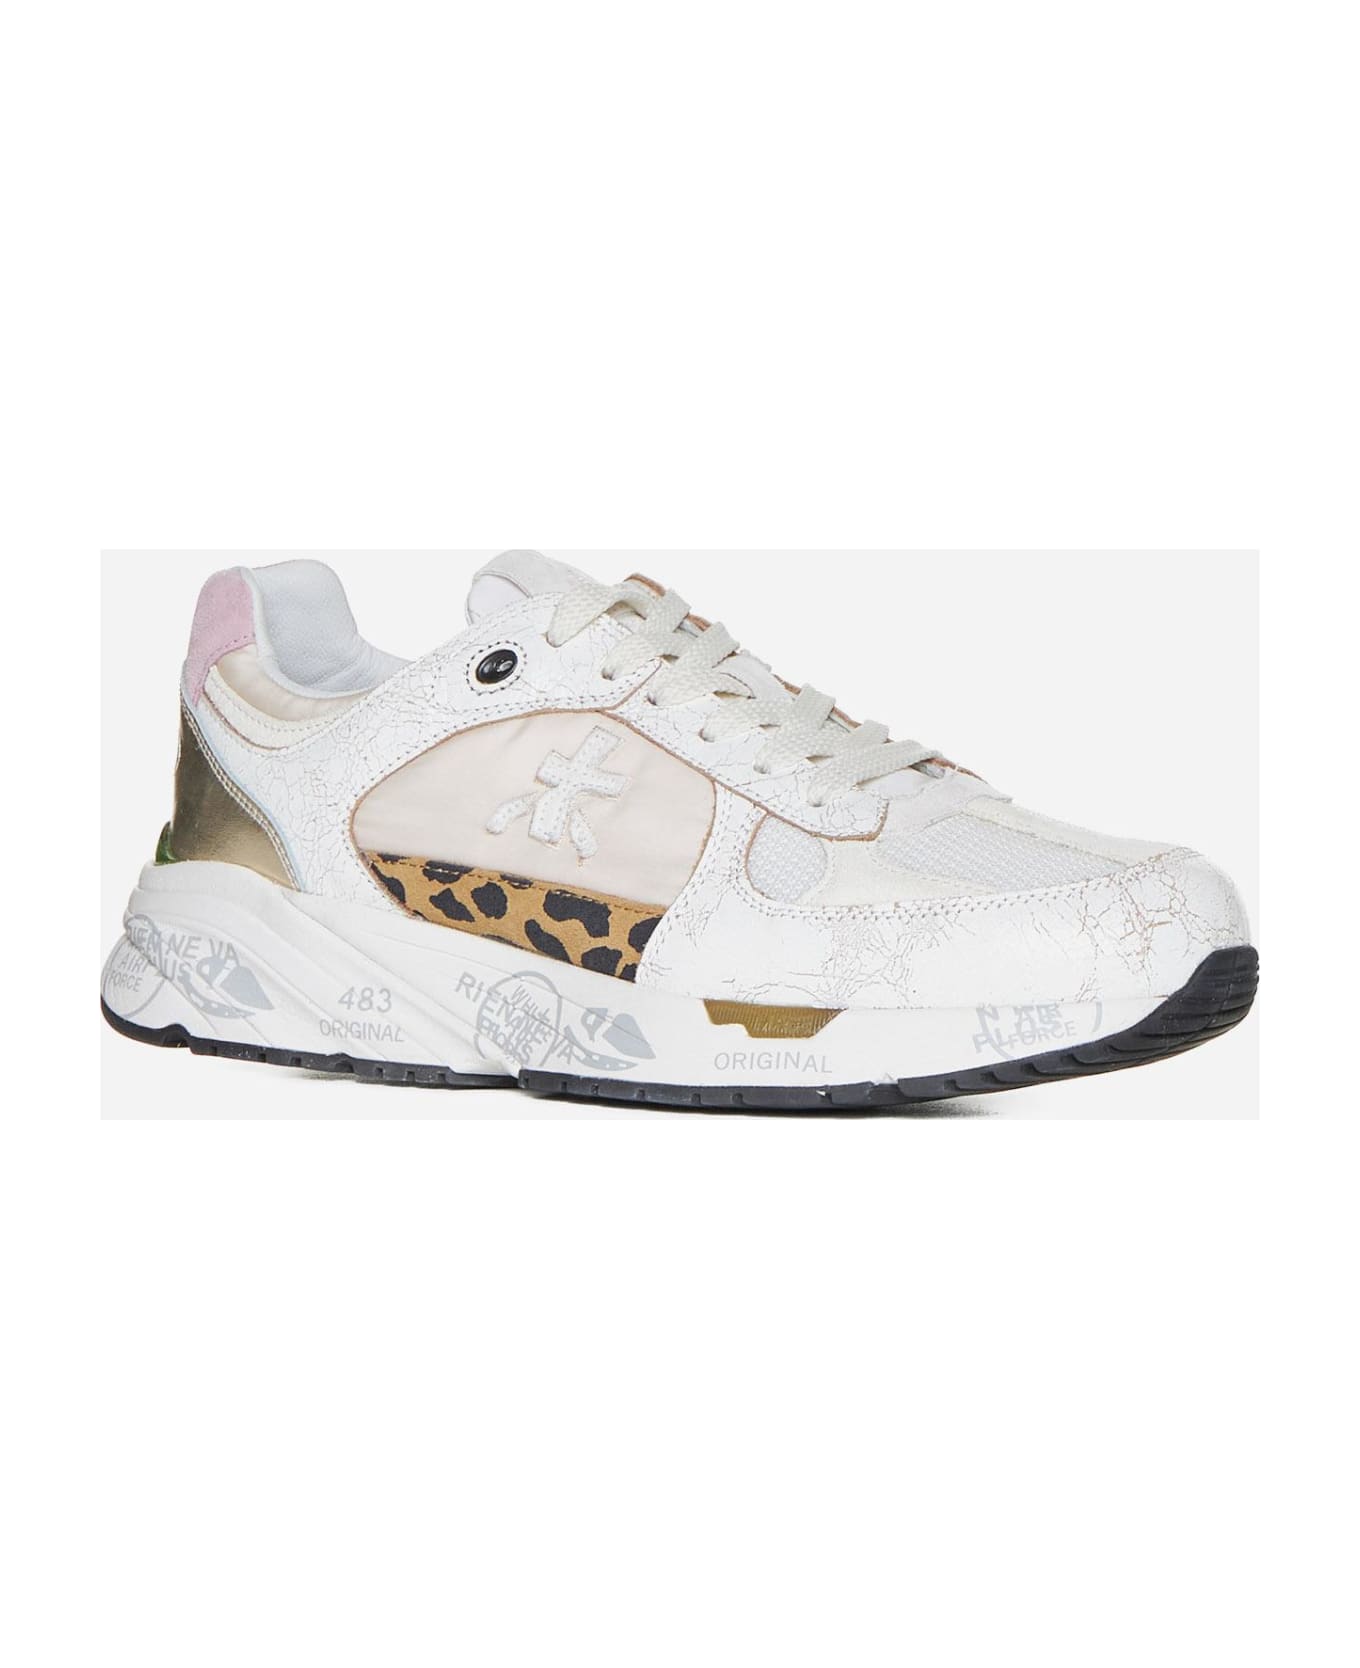 Premiata Mased Leather, Suede And Nylon Sneakers - Offwhite スニーカー